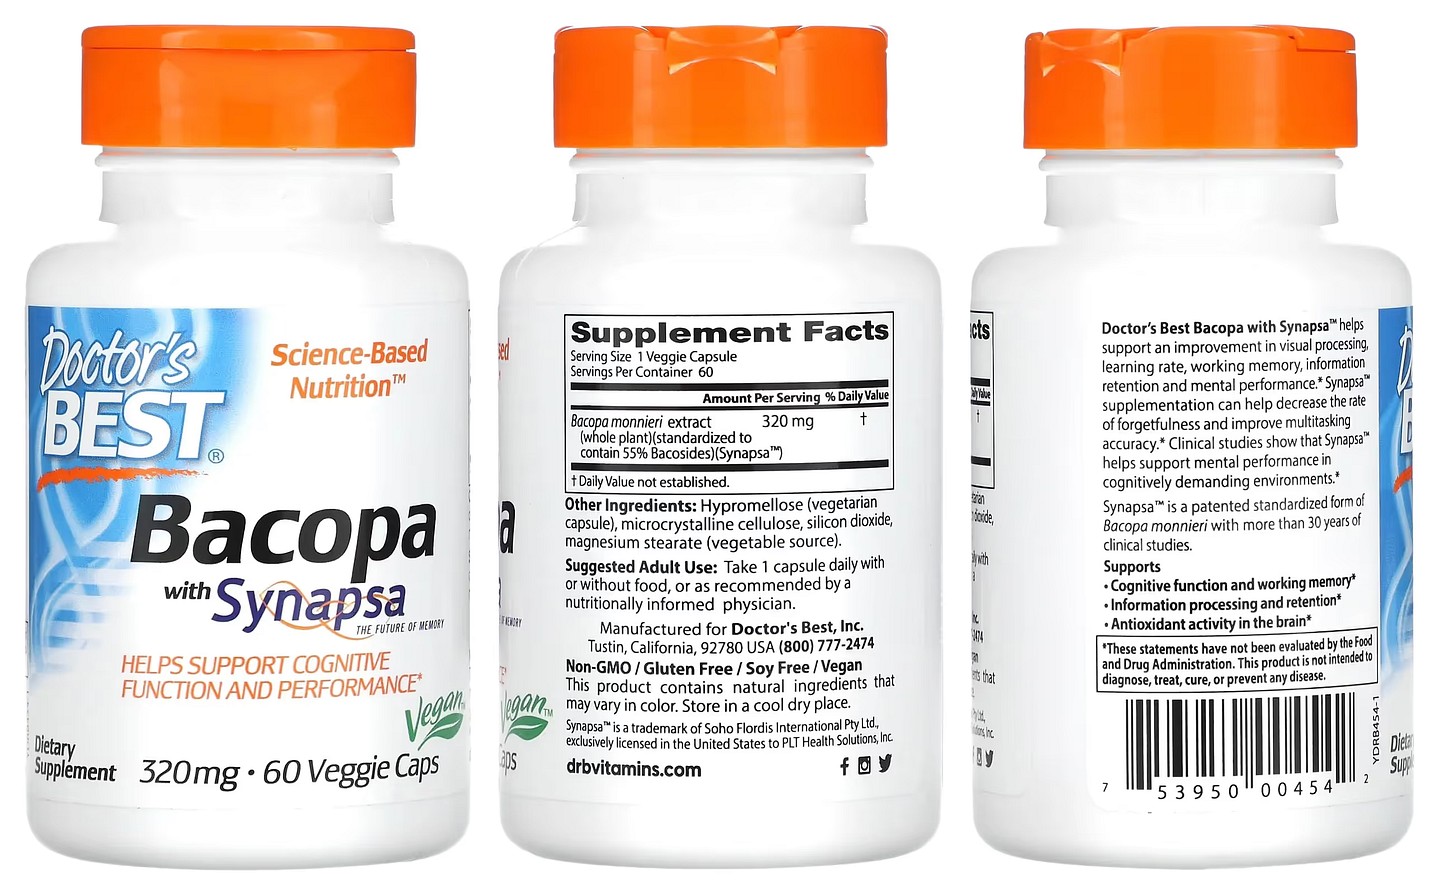 Doctor's Best, Bacopa with Synapsa packaging